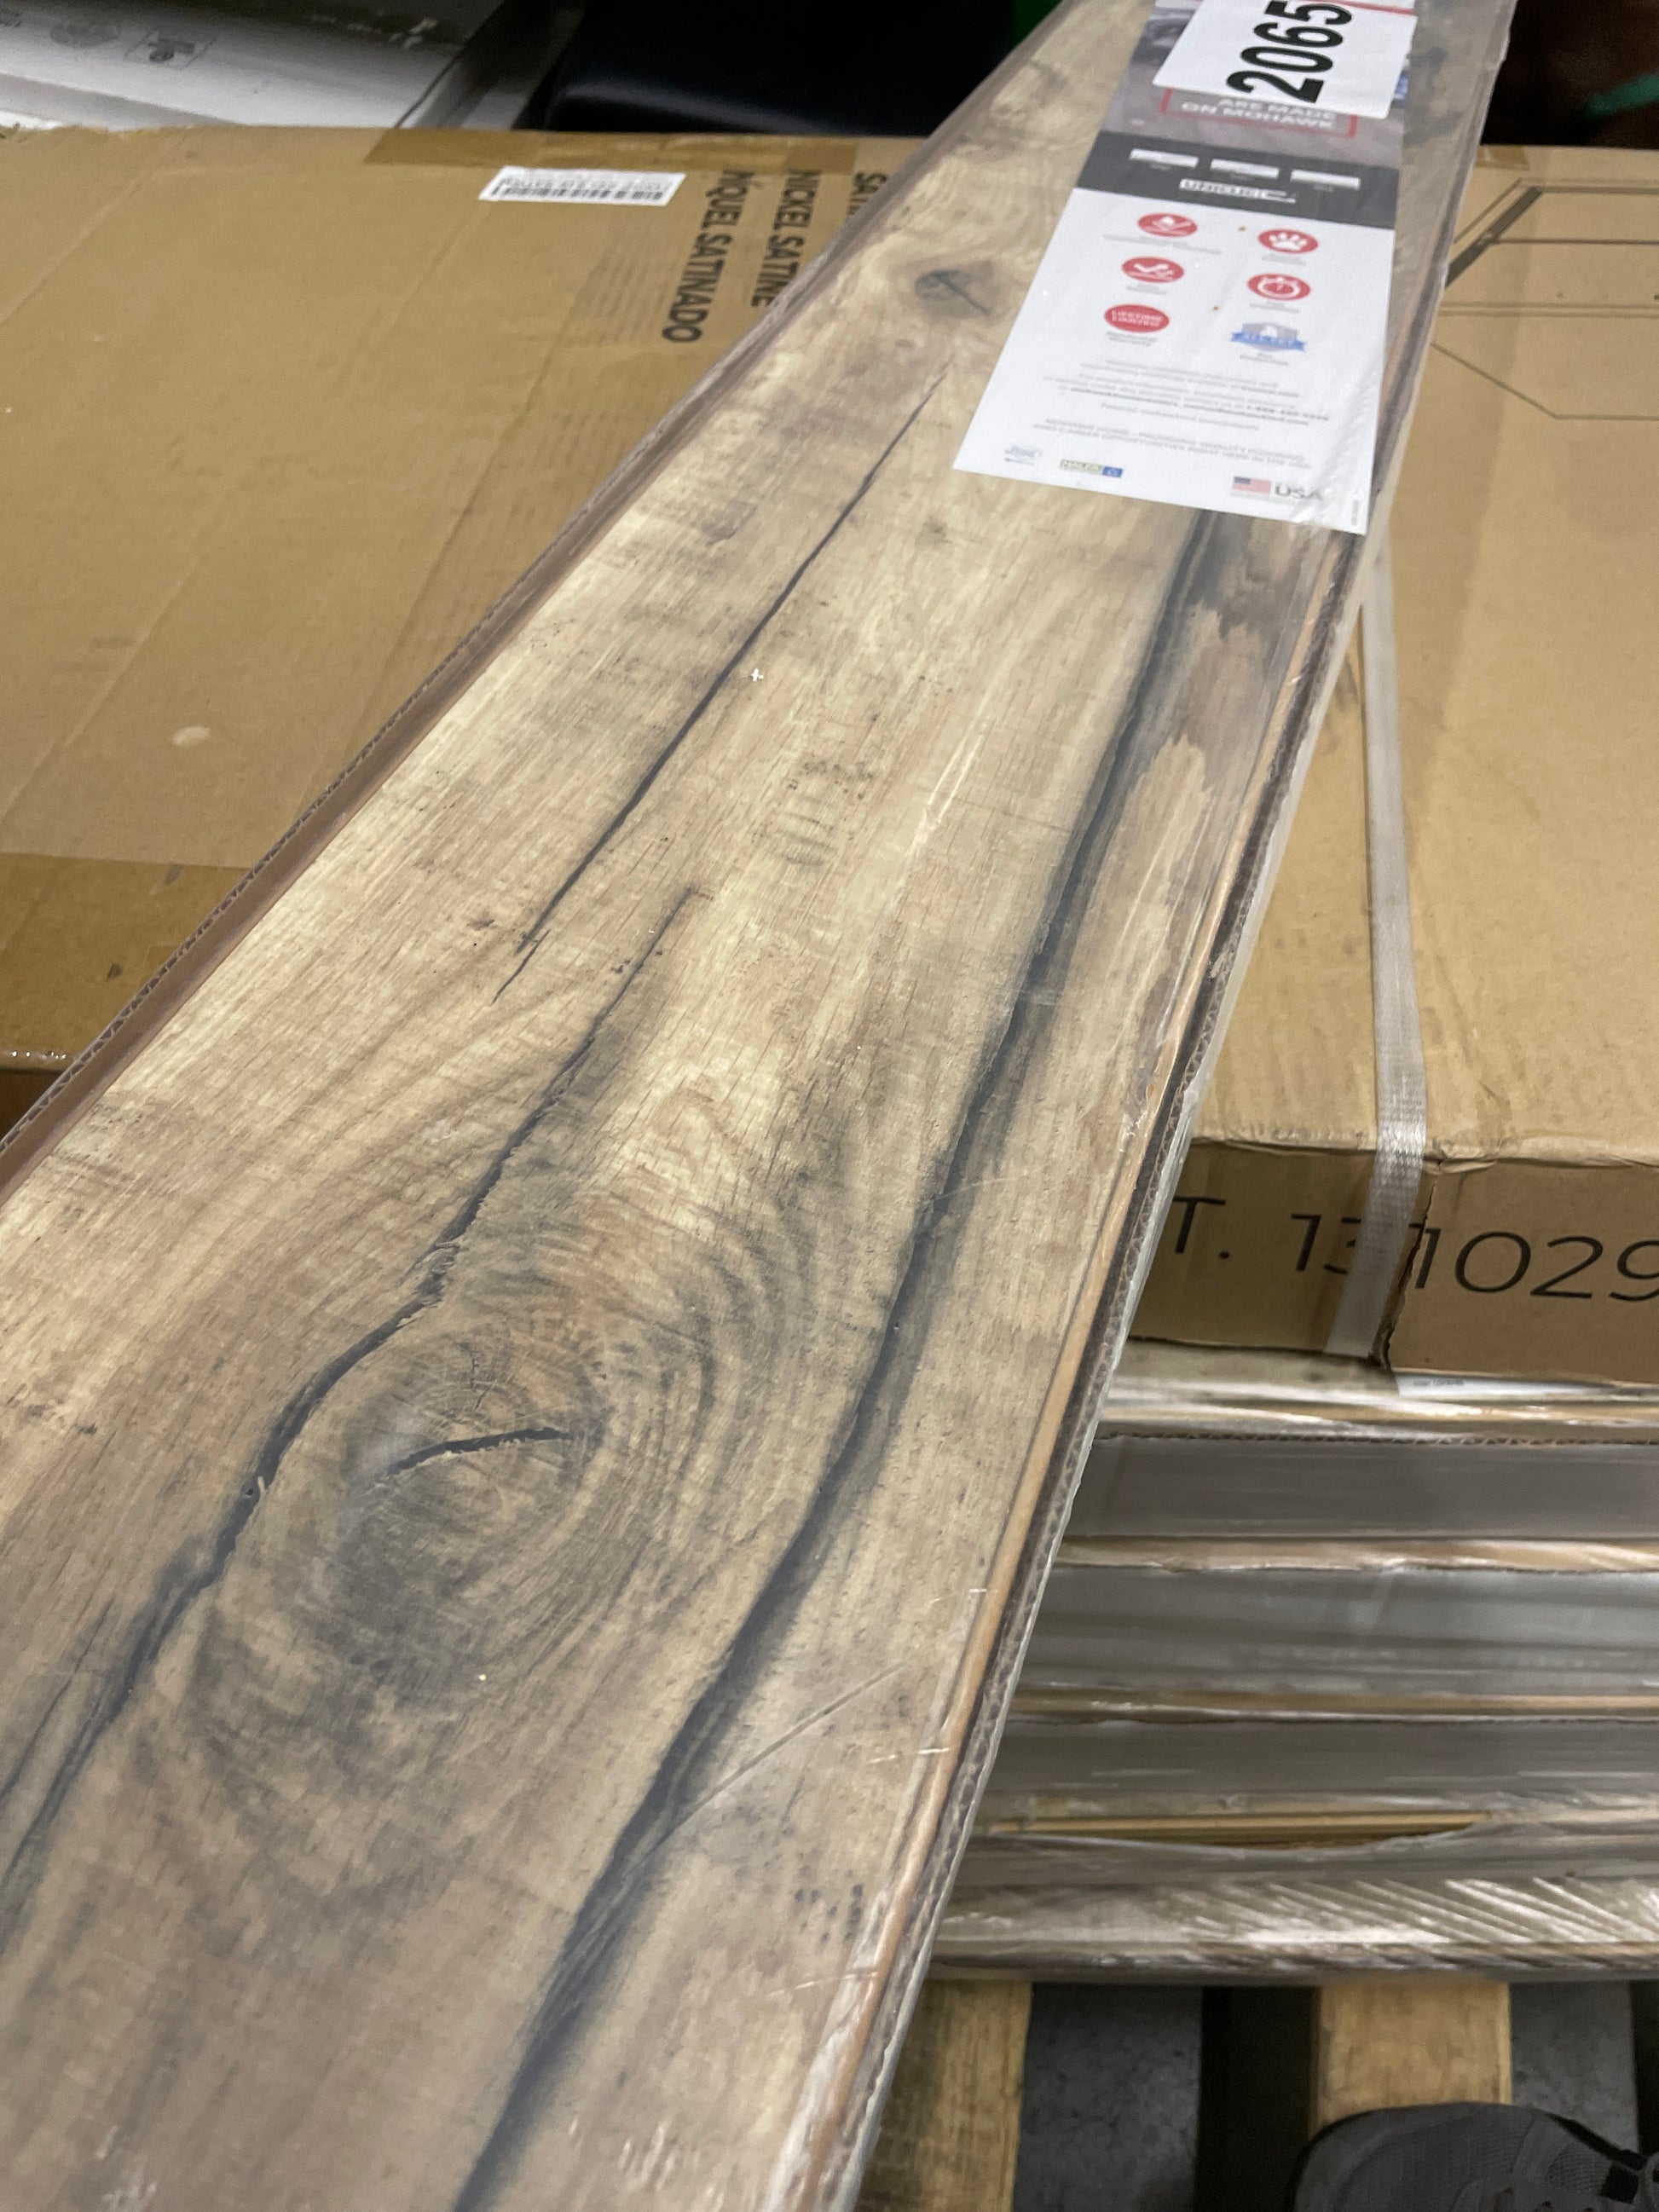 Costco - 6 Boxes - Mohawk Home Laurel Canyon Oak Waterproof Laminate 12mm Thick Plank With 2mm Attached Pad - Retail $276 Default Title